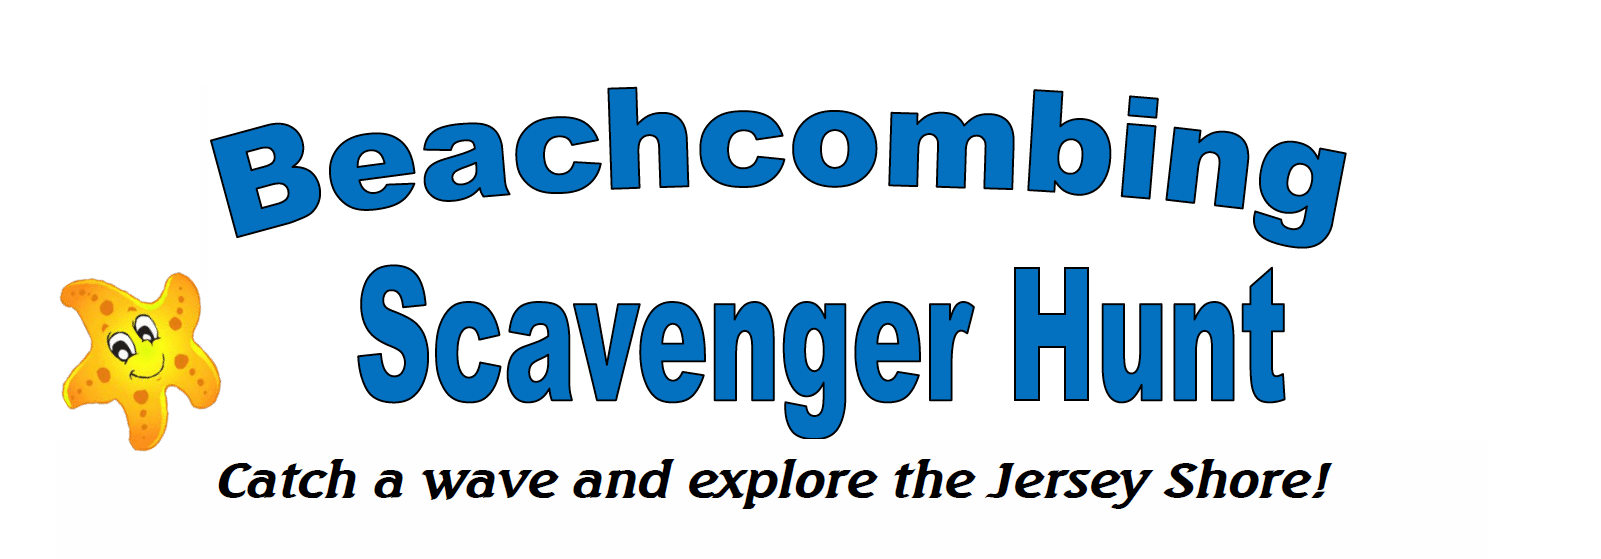 Join the Beachcombing Scavenger Hunt and Explore Local Sea Creatures!